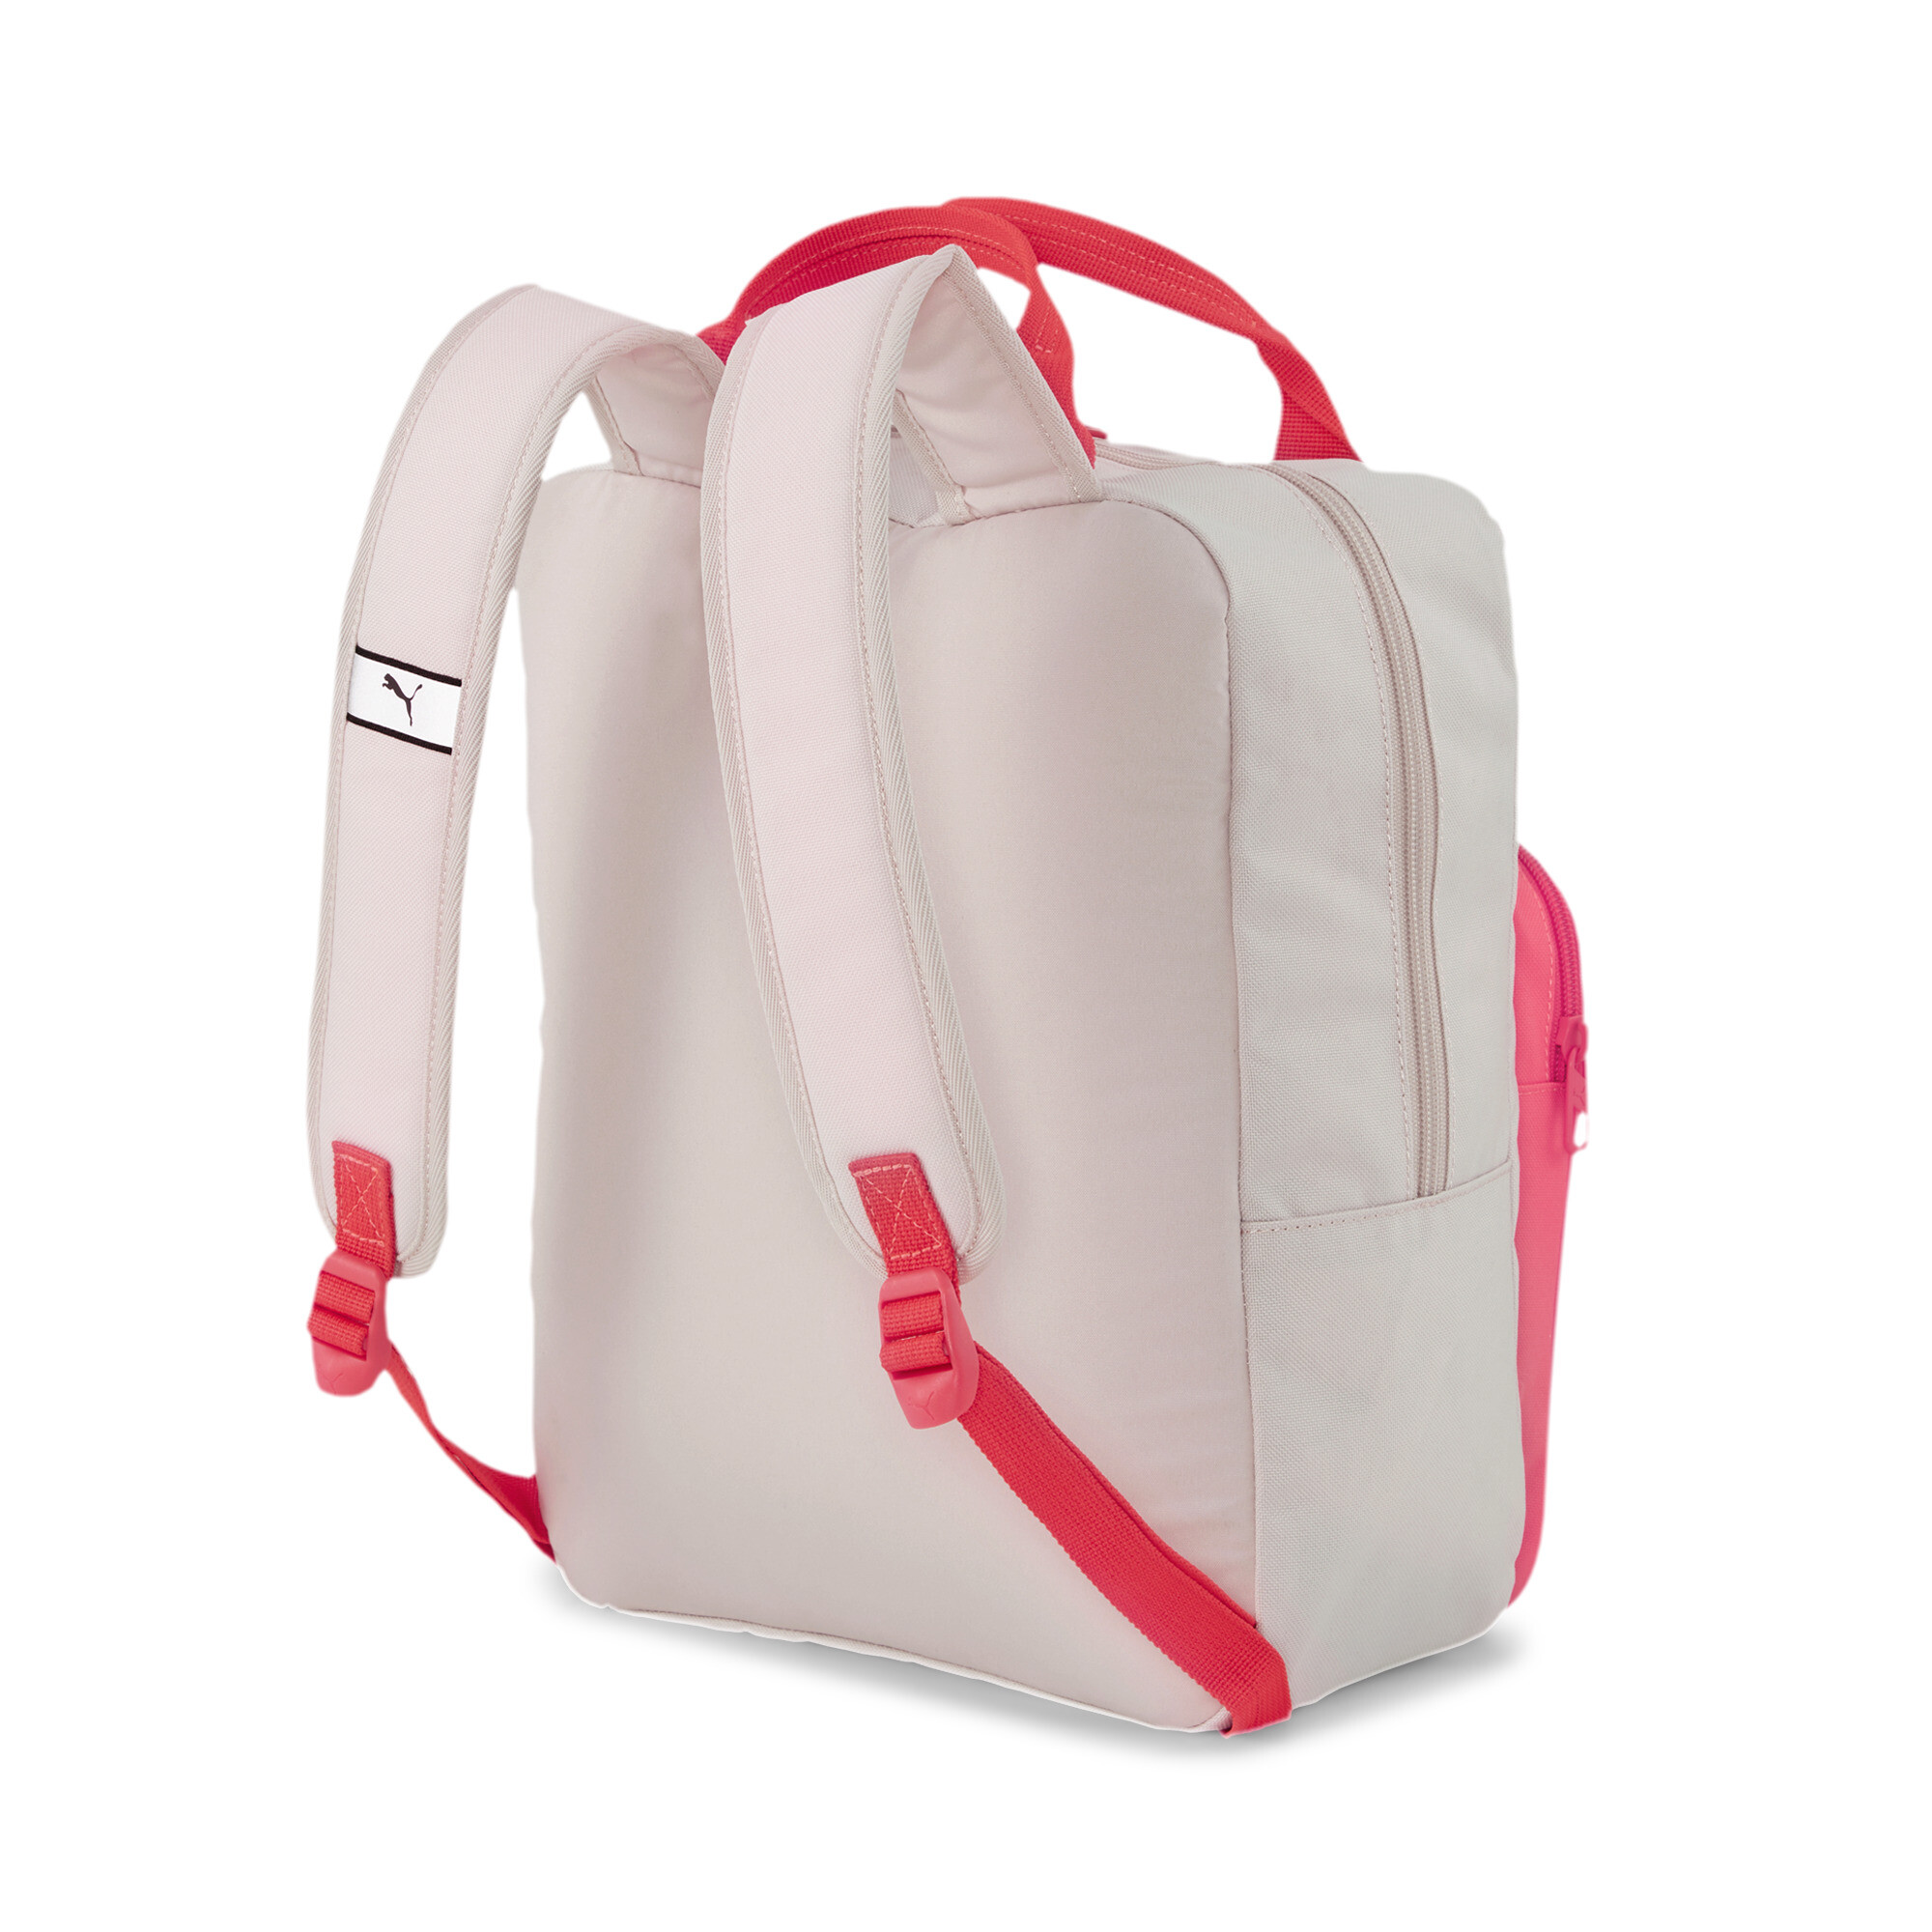 Puma Animals Youth Backpack, Pink, Accessories